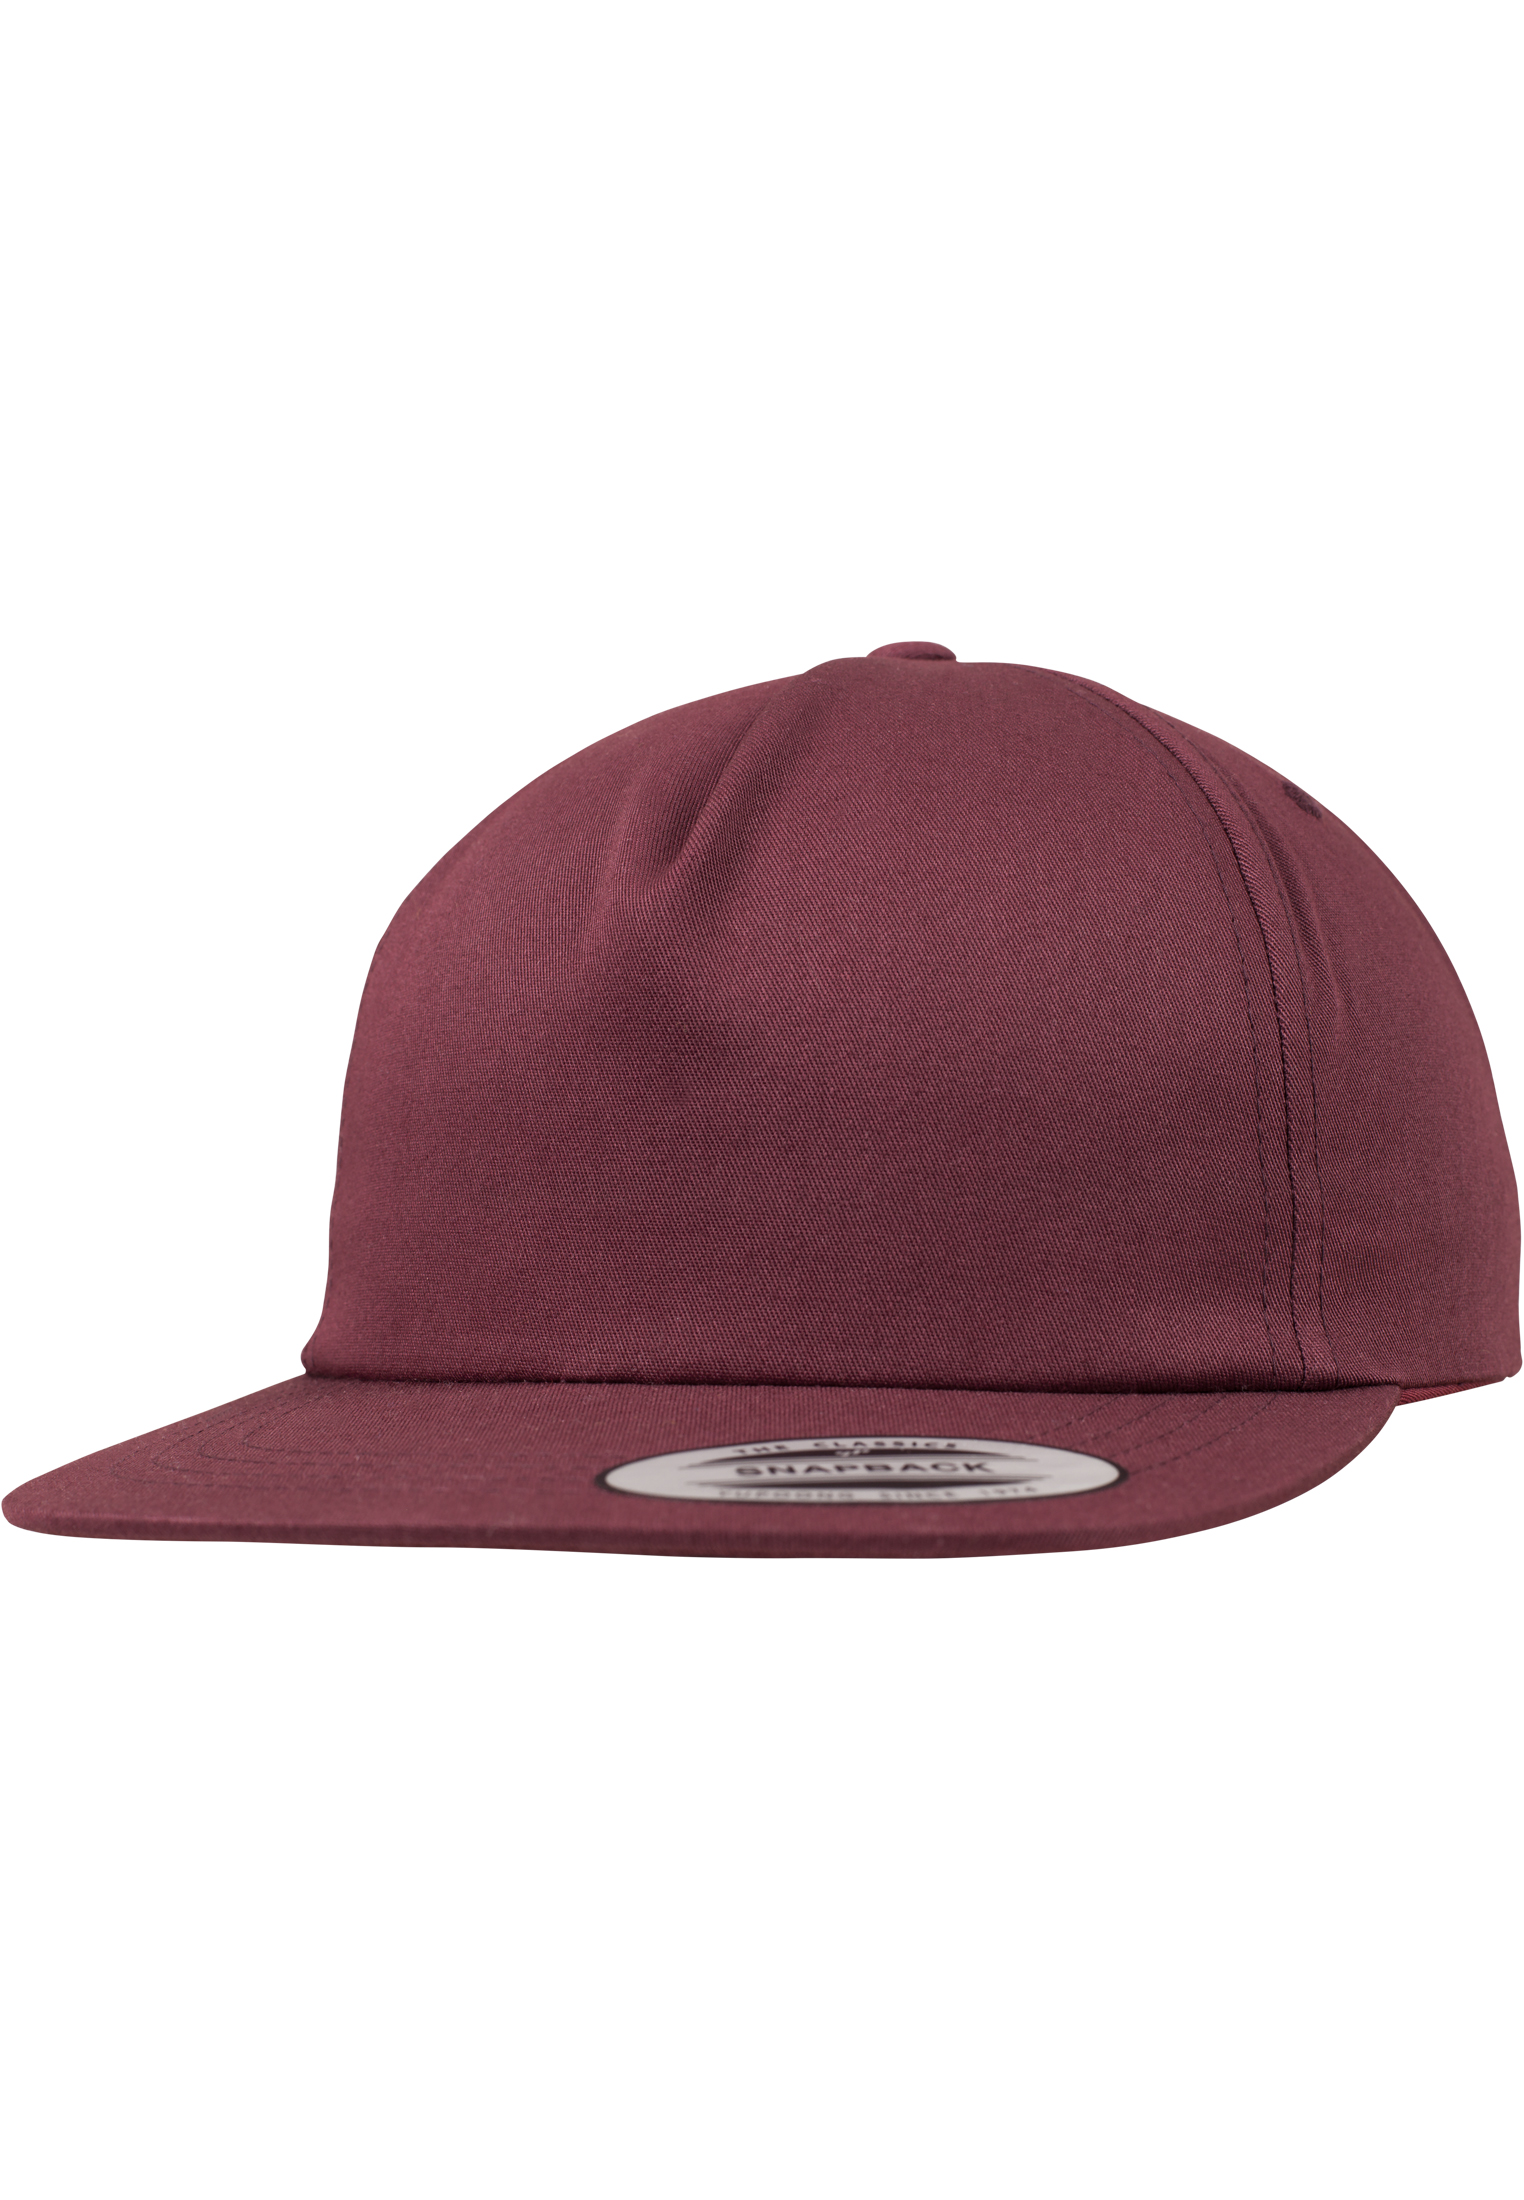 Snapback Unstructured 5-Panel Snapback in Farbe maroon